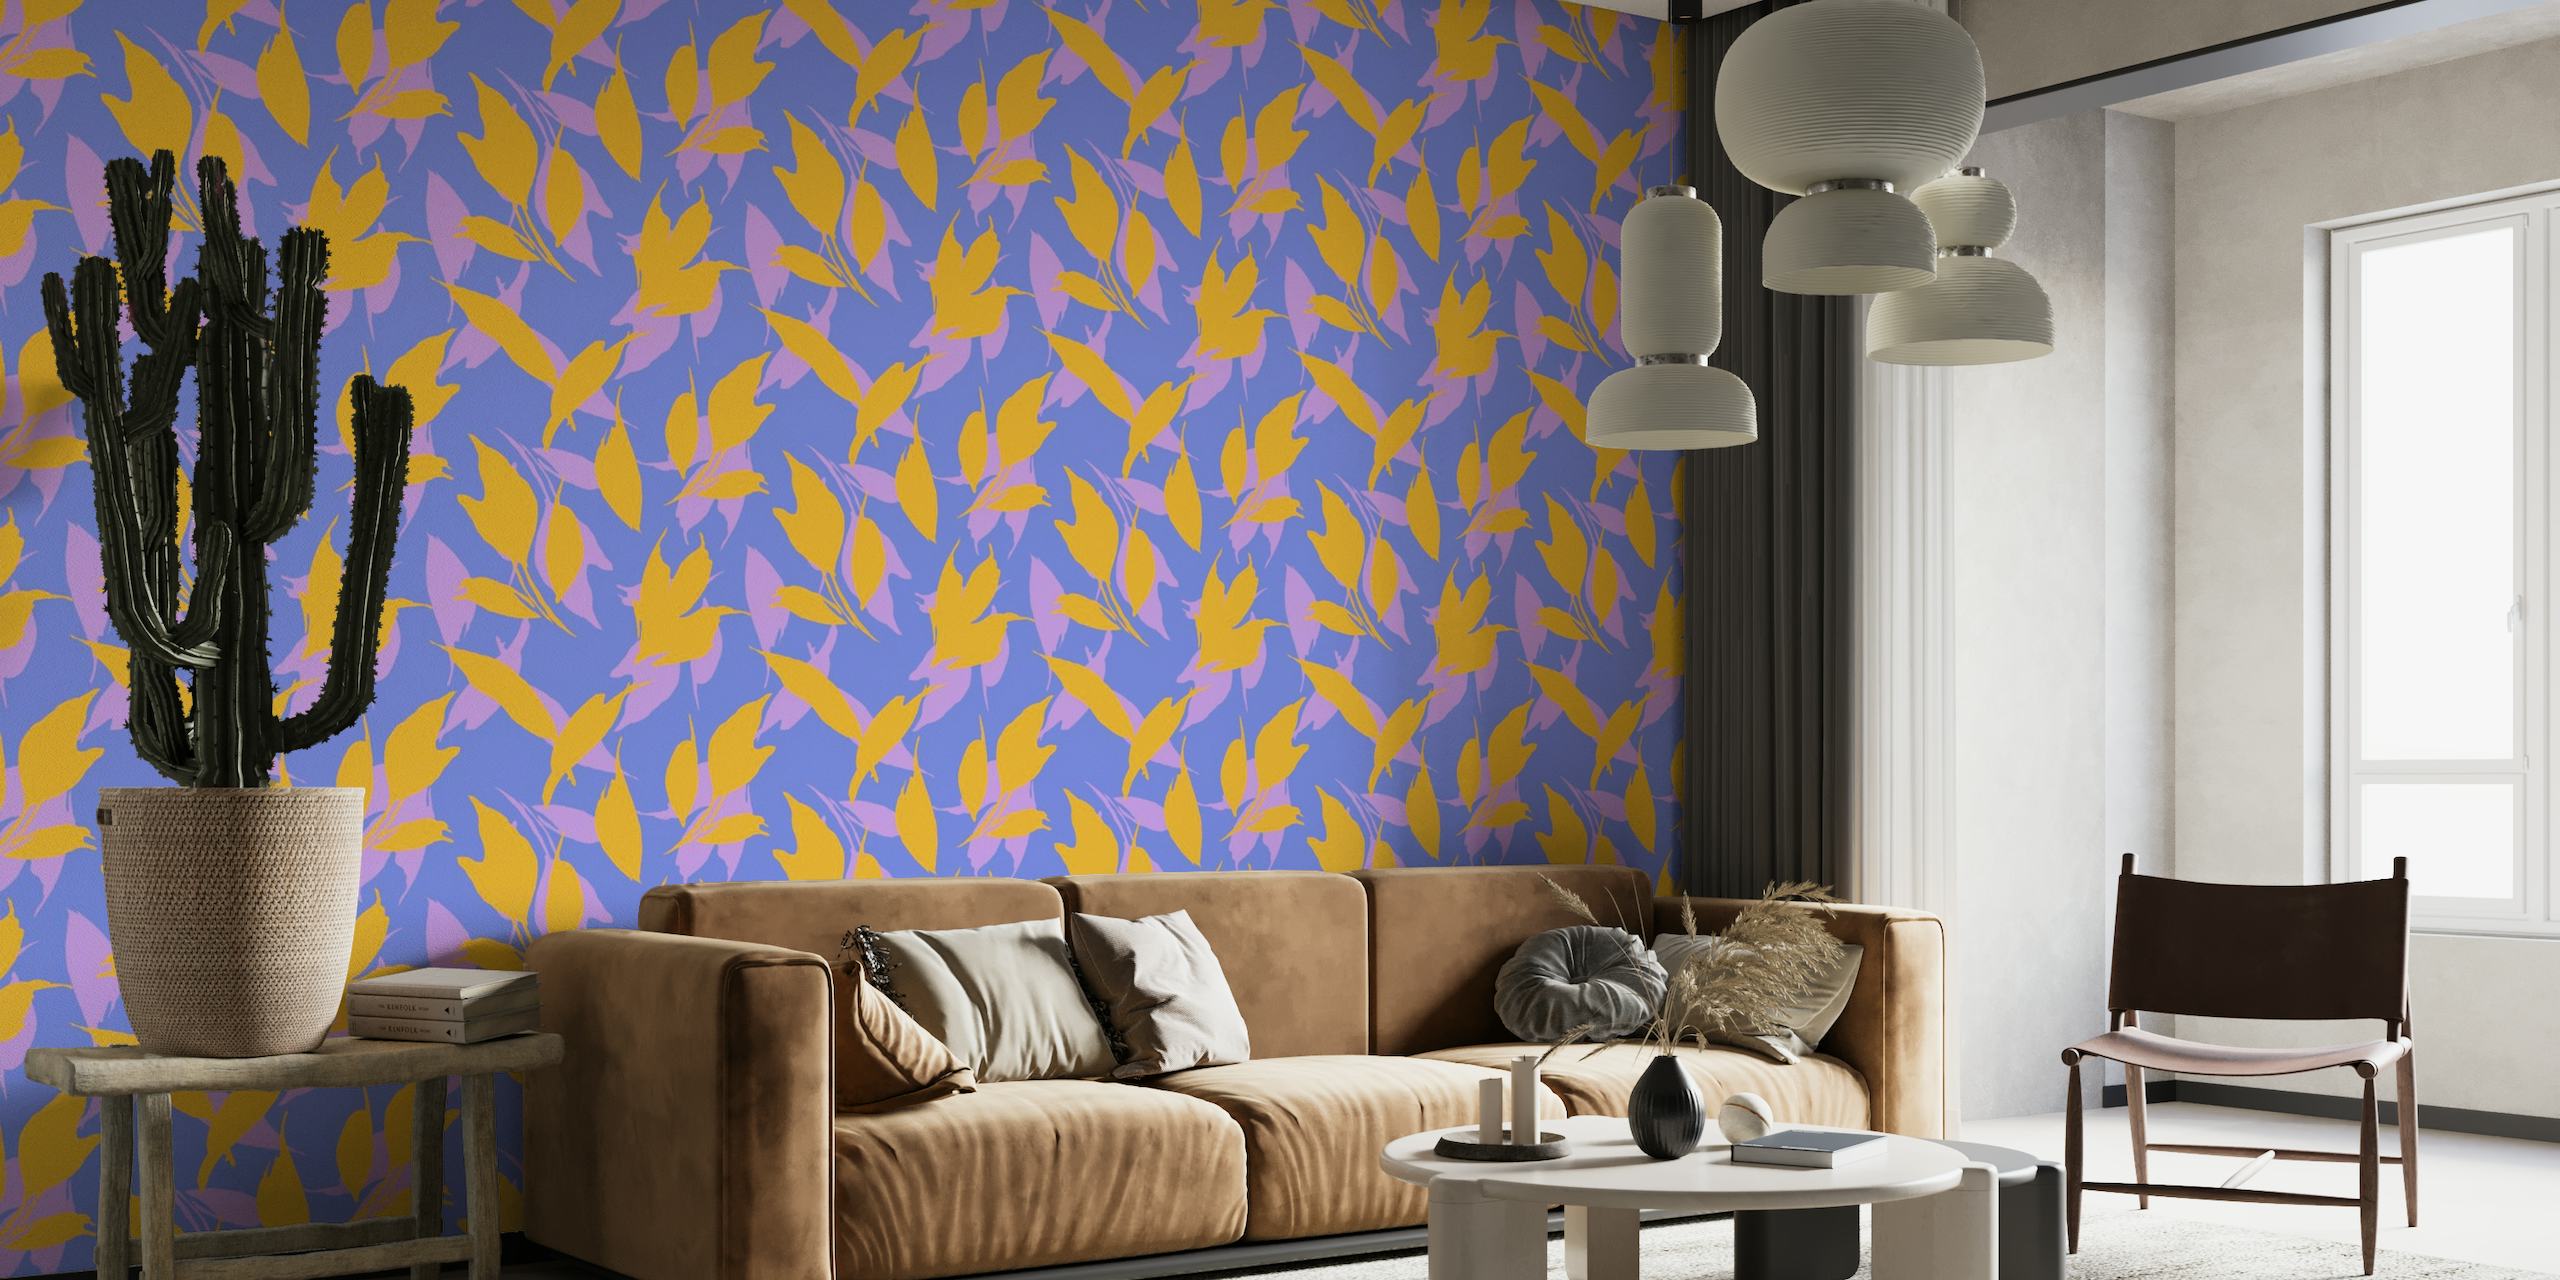 Botanical leaves wall mural in purple and yellow